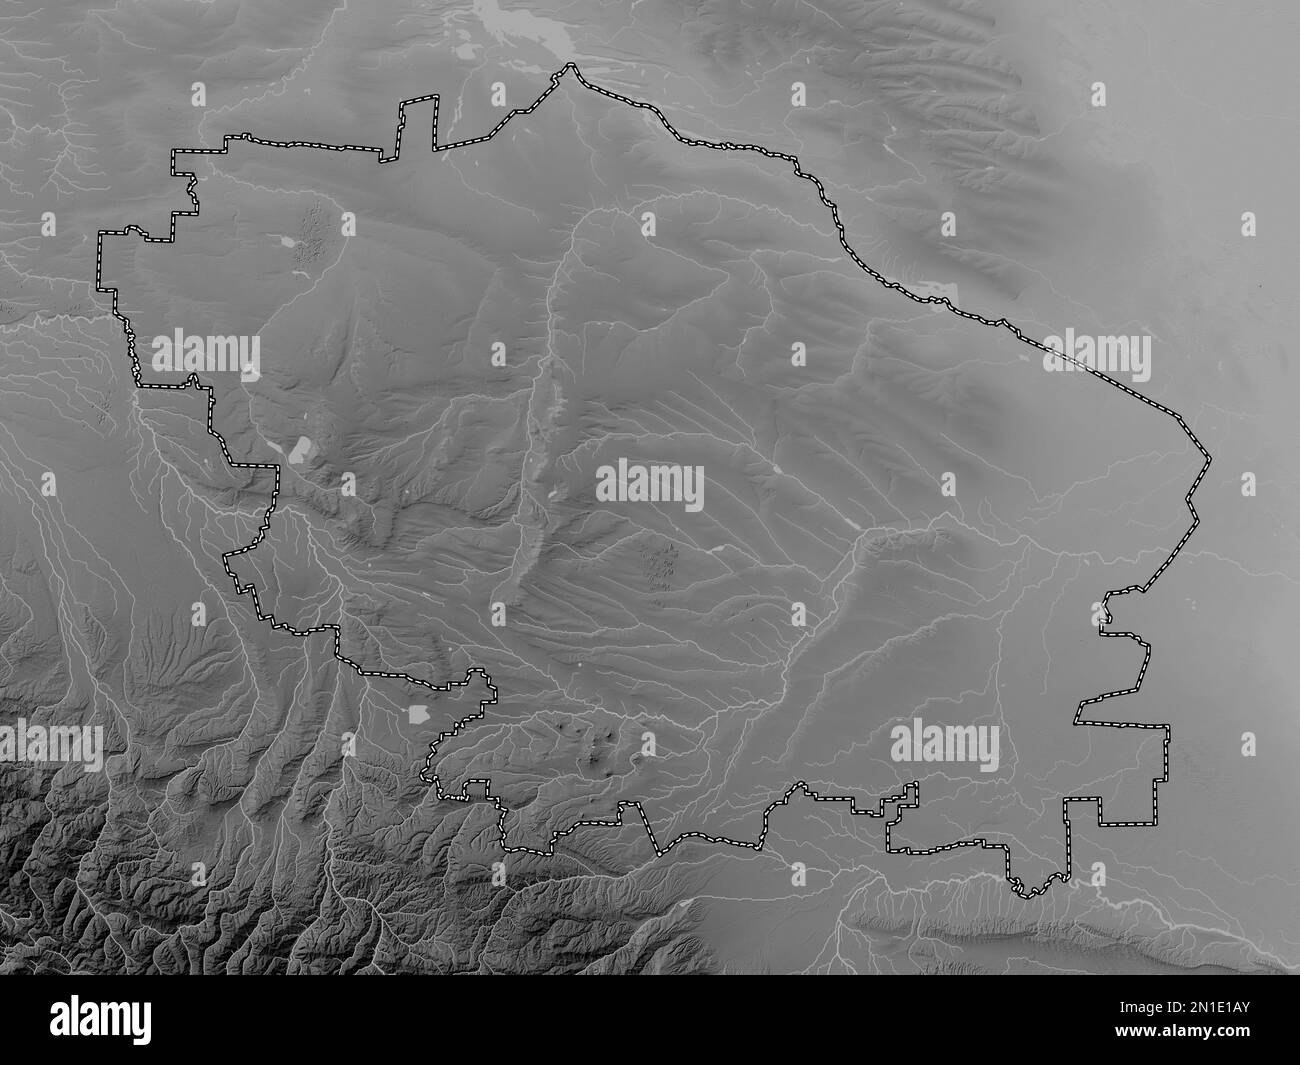 Stavropol', territory of Russia. Grayscale elevation map with lakes and rivers Stock Photo